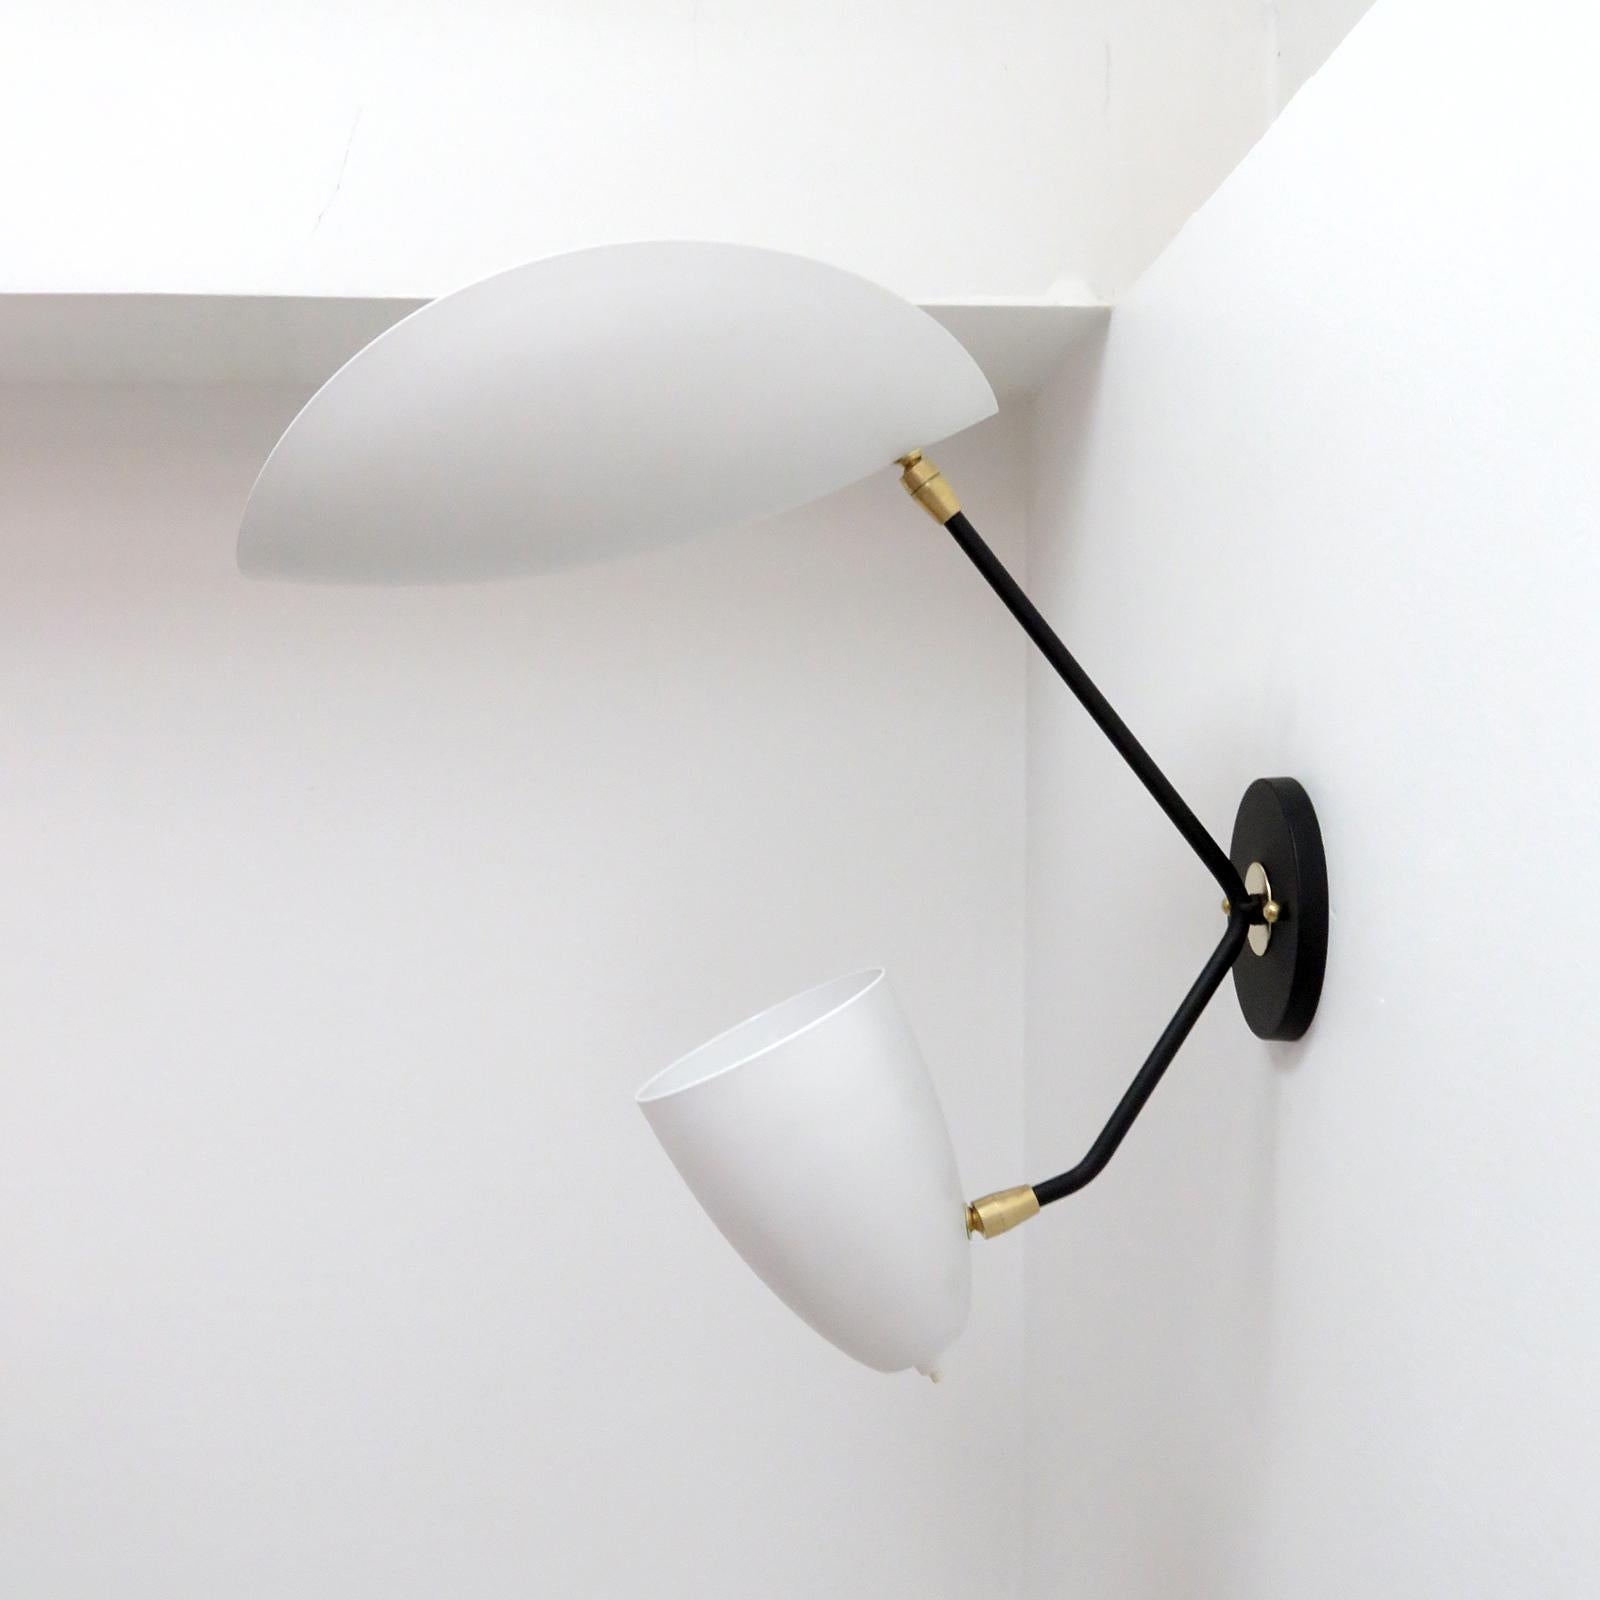 Wonderful asymmetrical double arm wall lights by Gallery L7, handcrafted and finished in Los Angeles from American brass with one fully adjustable two-tone cone shade and one reflector shell light, both in egg shell with white powder coated